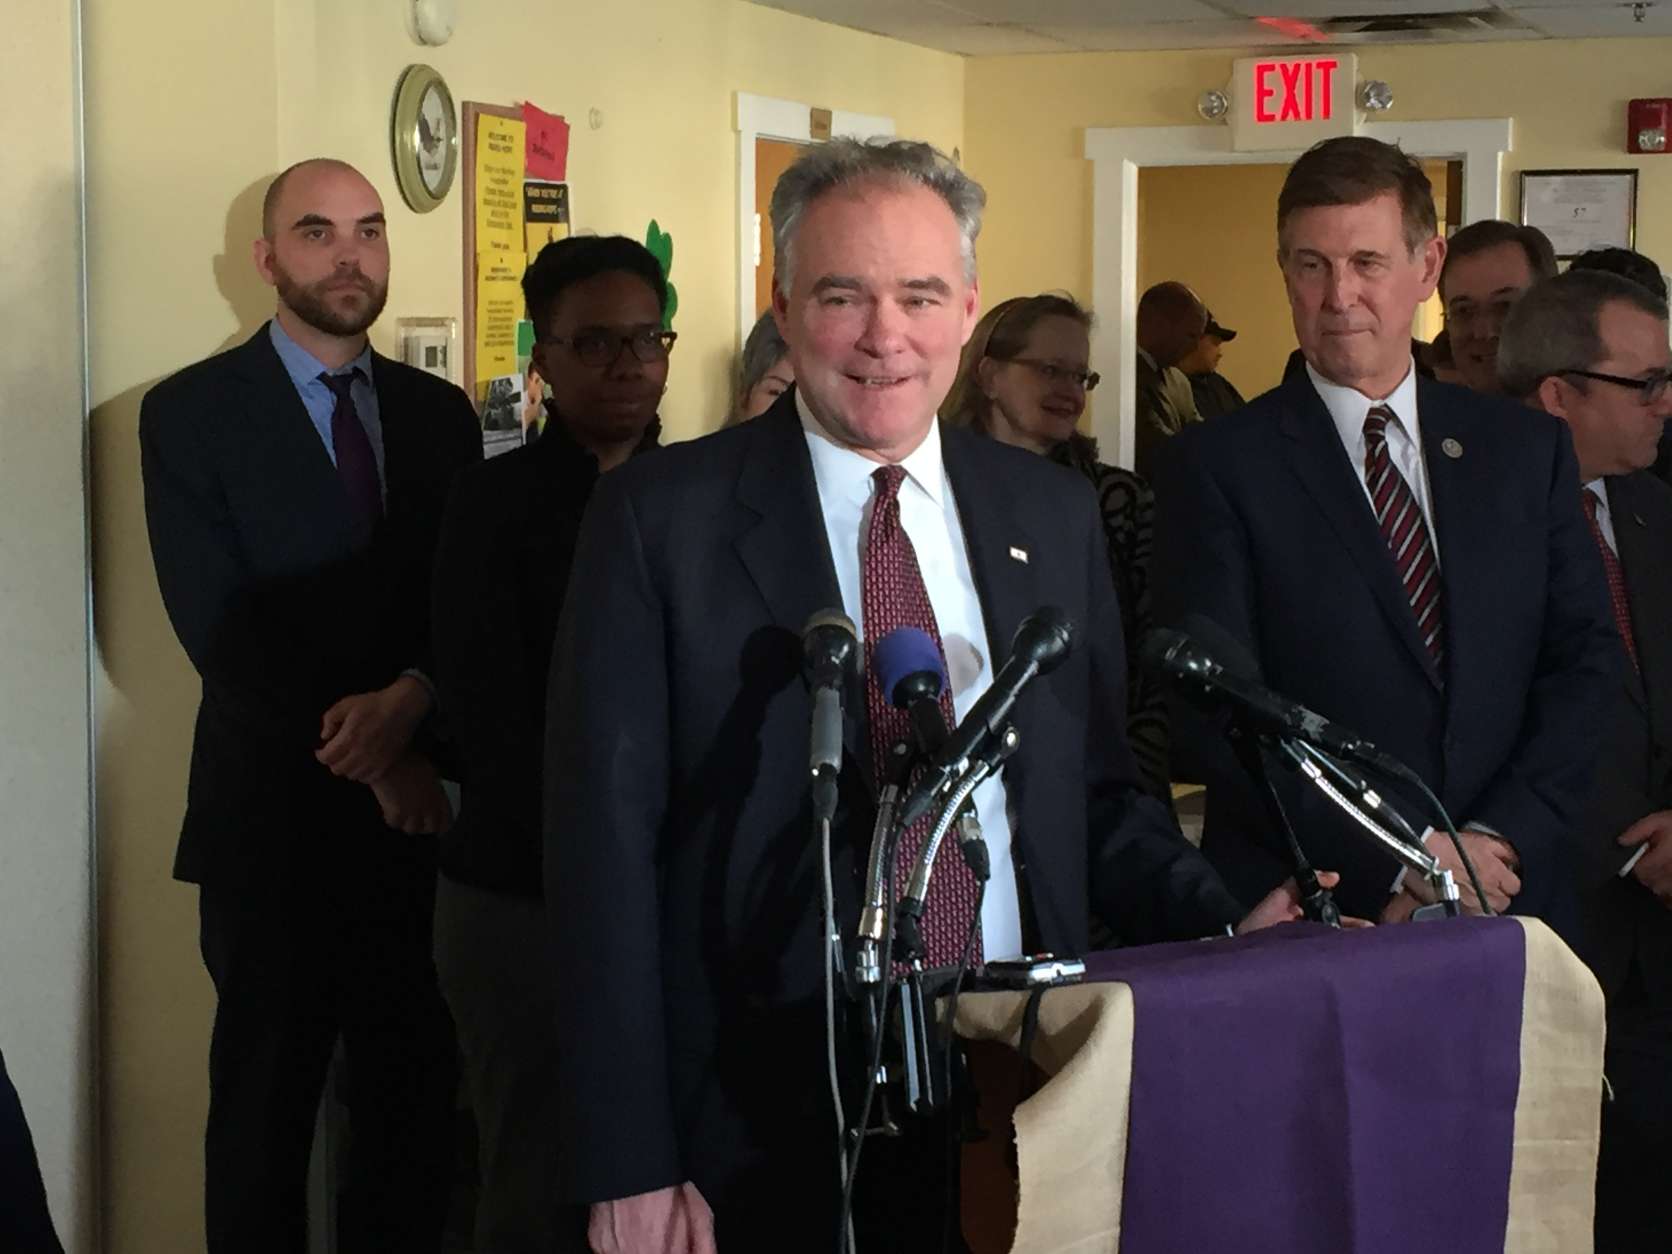 At Thursday's event, Sen. Tim Kaine said immigrants are typically law-abiding people who are more likely than the rest of the population to become crime victims. (WTOP/Michelle Basch)